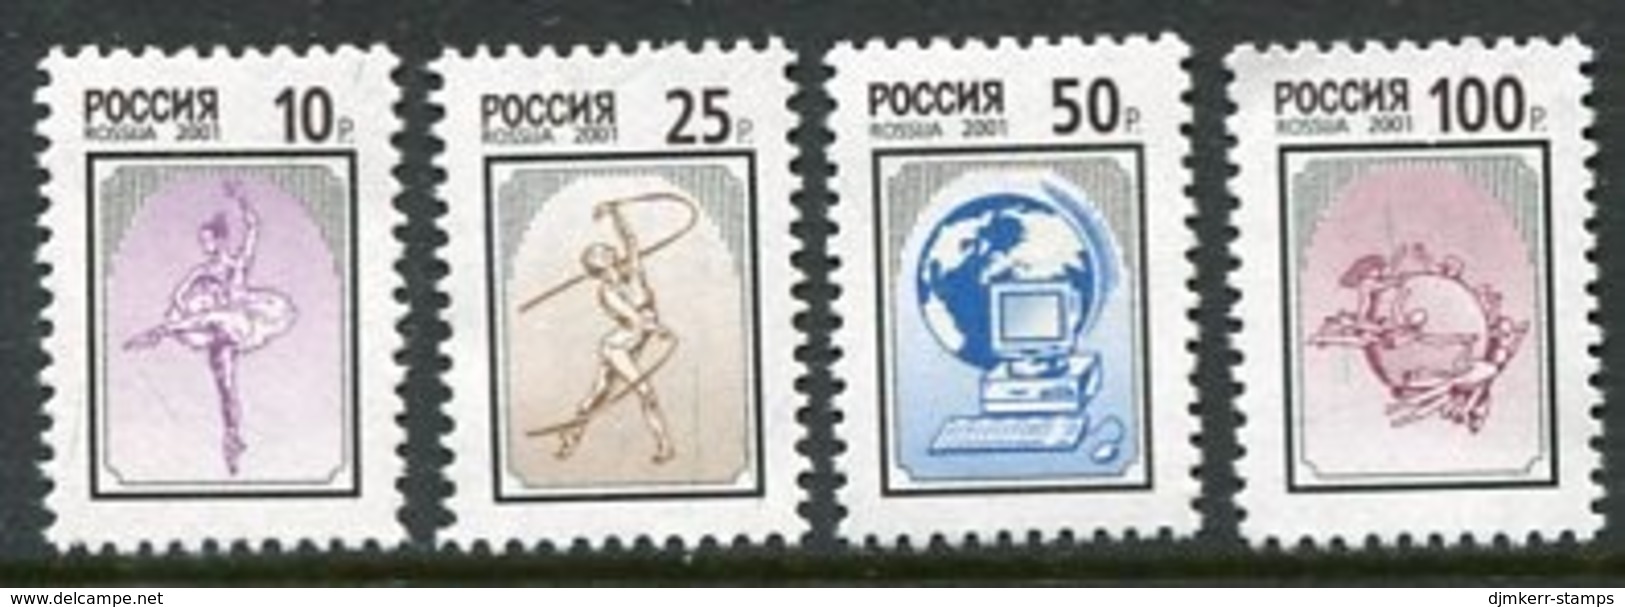 RUSSIA 2001 Definitive High Values MNH / **  Michel 885-88 - Unused Stamps